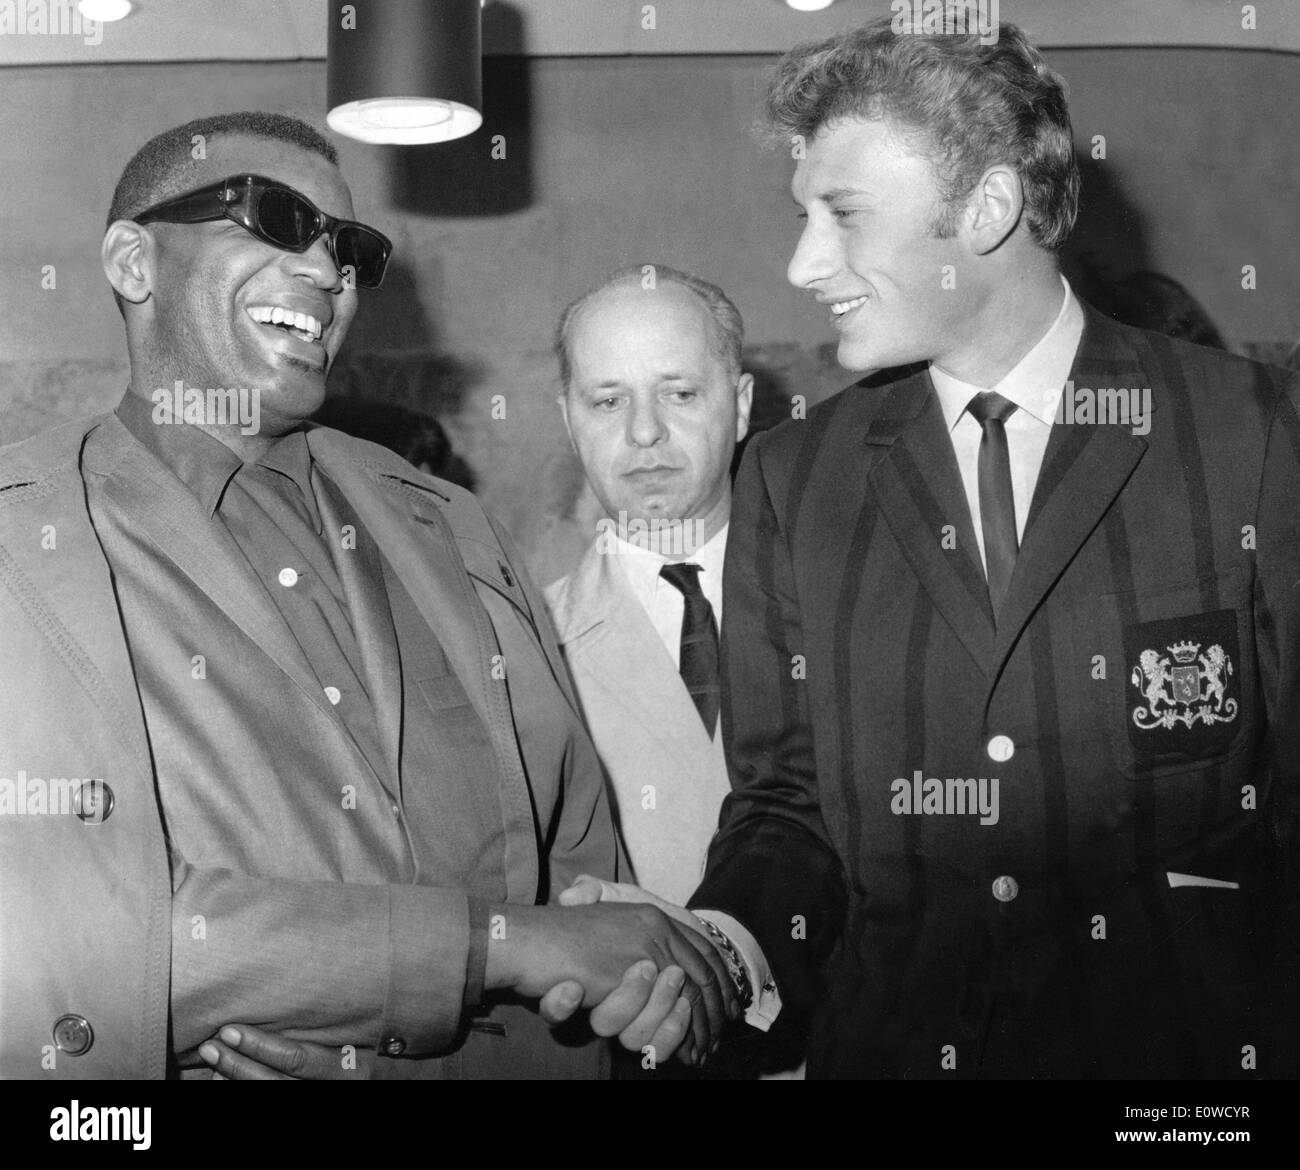 Singers Ray Charles and Johnny Hallyday shaking hands Stock Photo